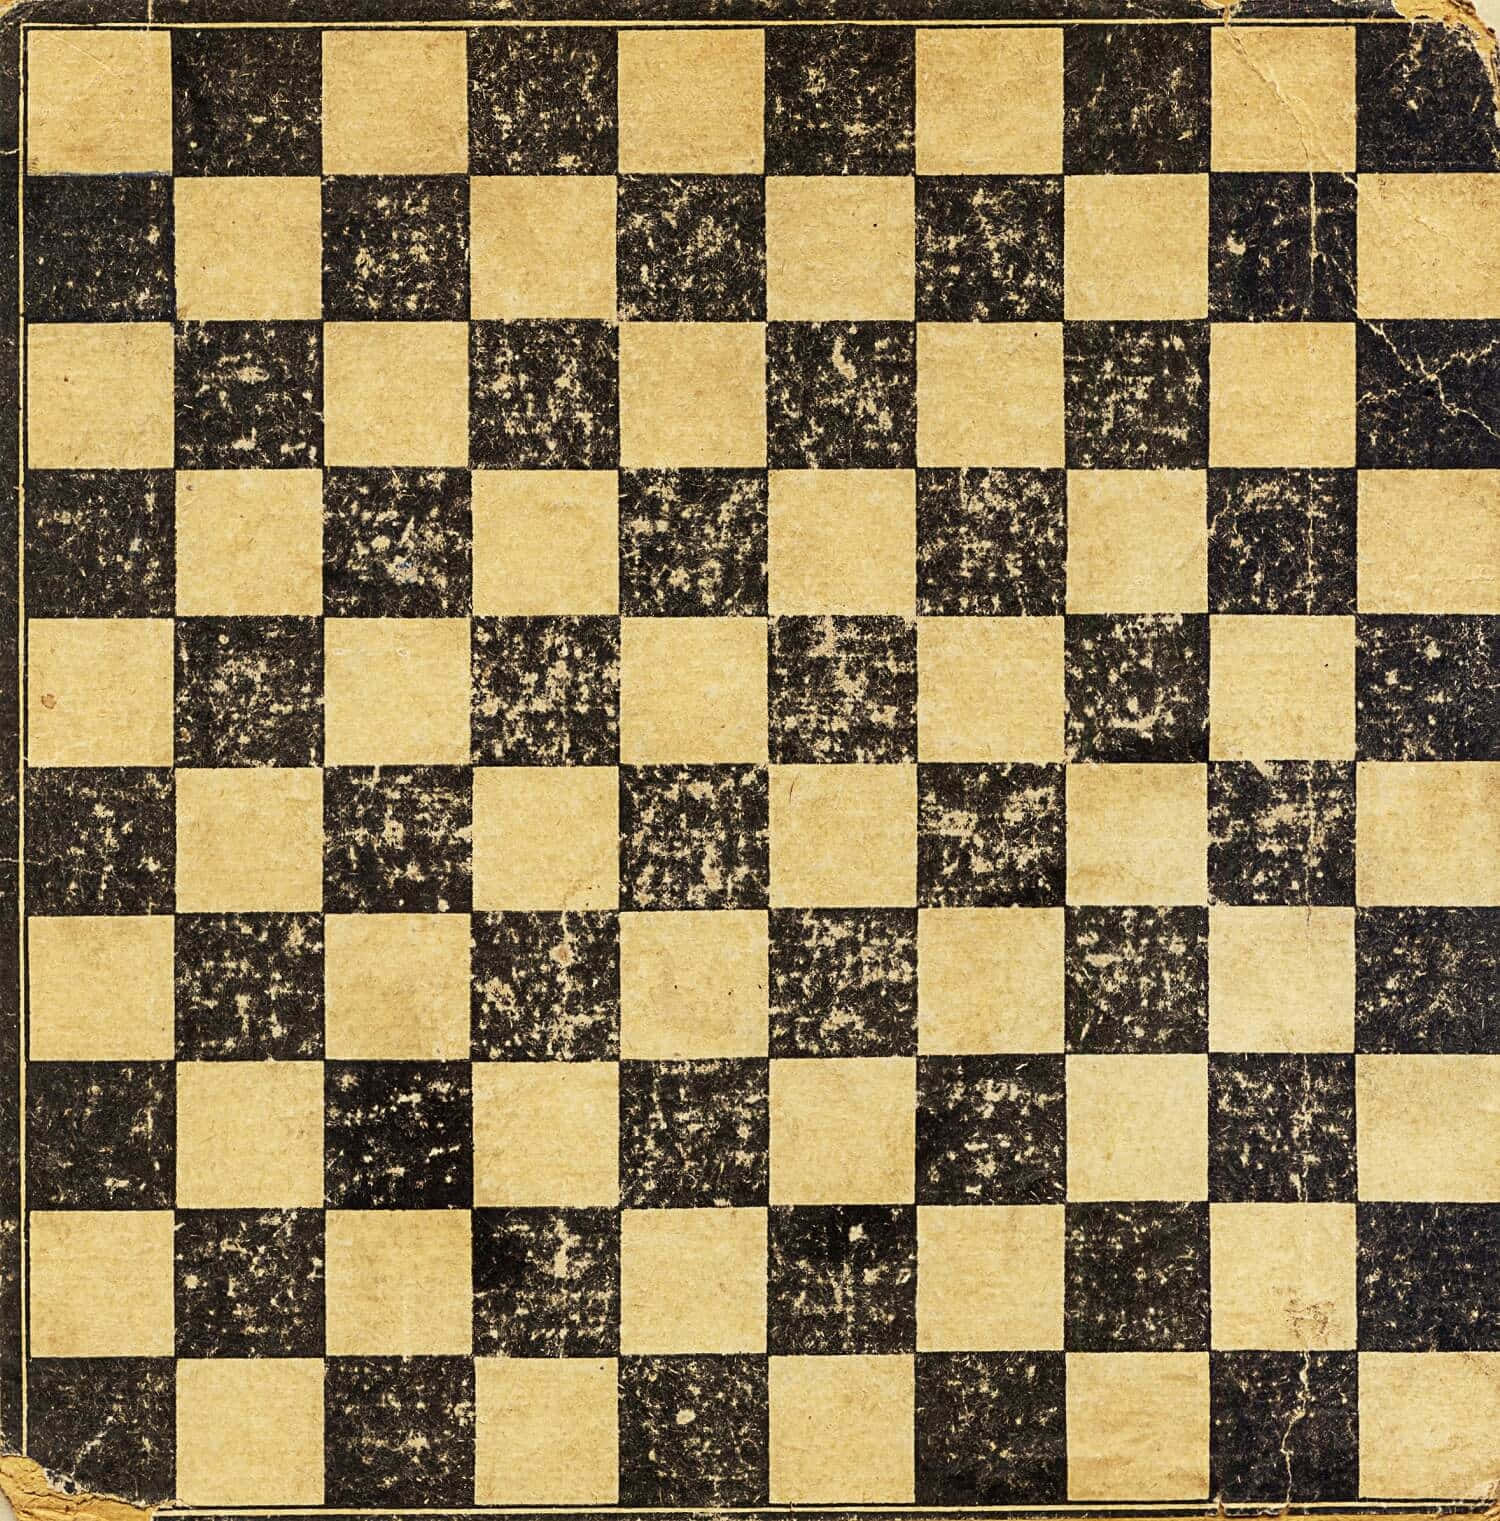 Strategize Your Next Move On A Classic Chessboard Background